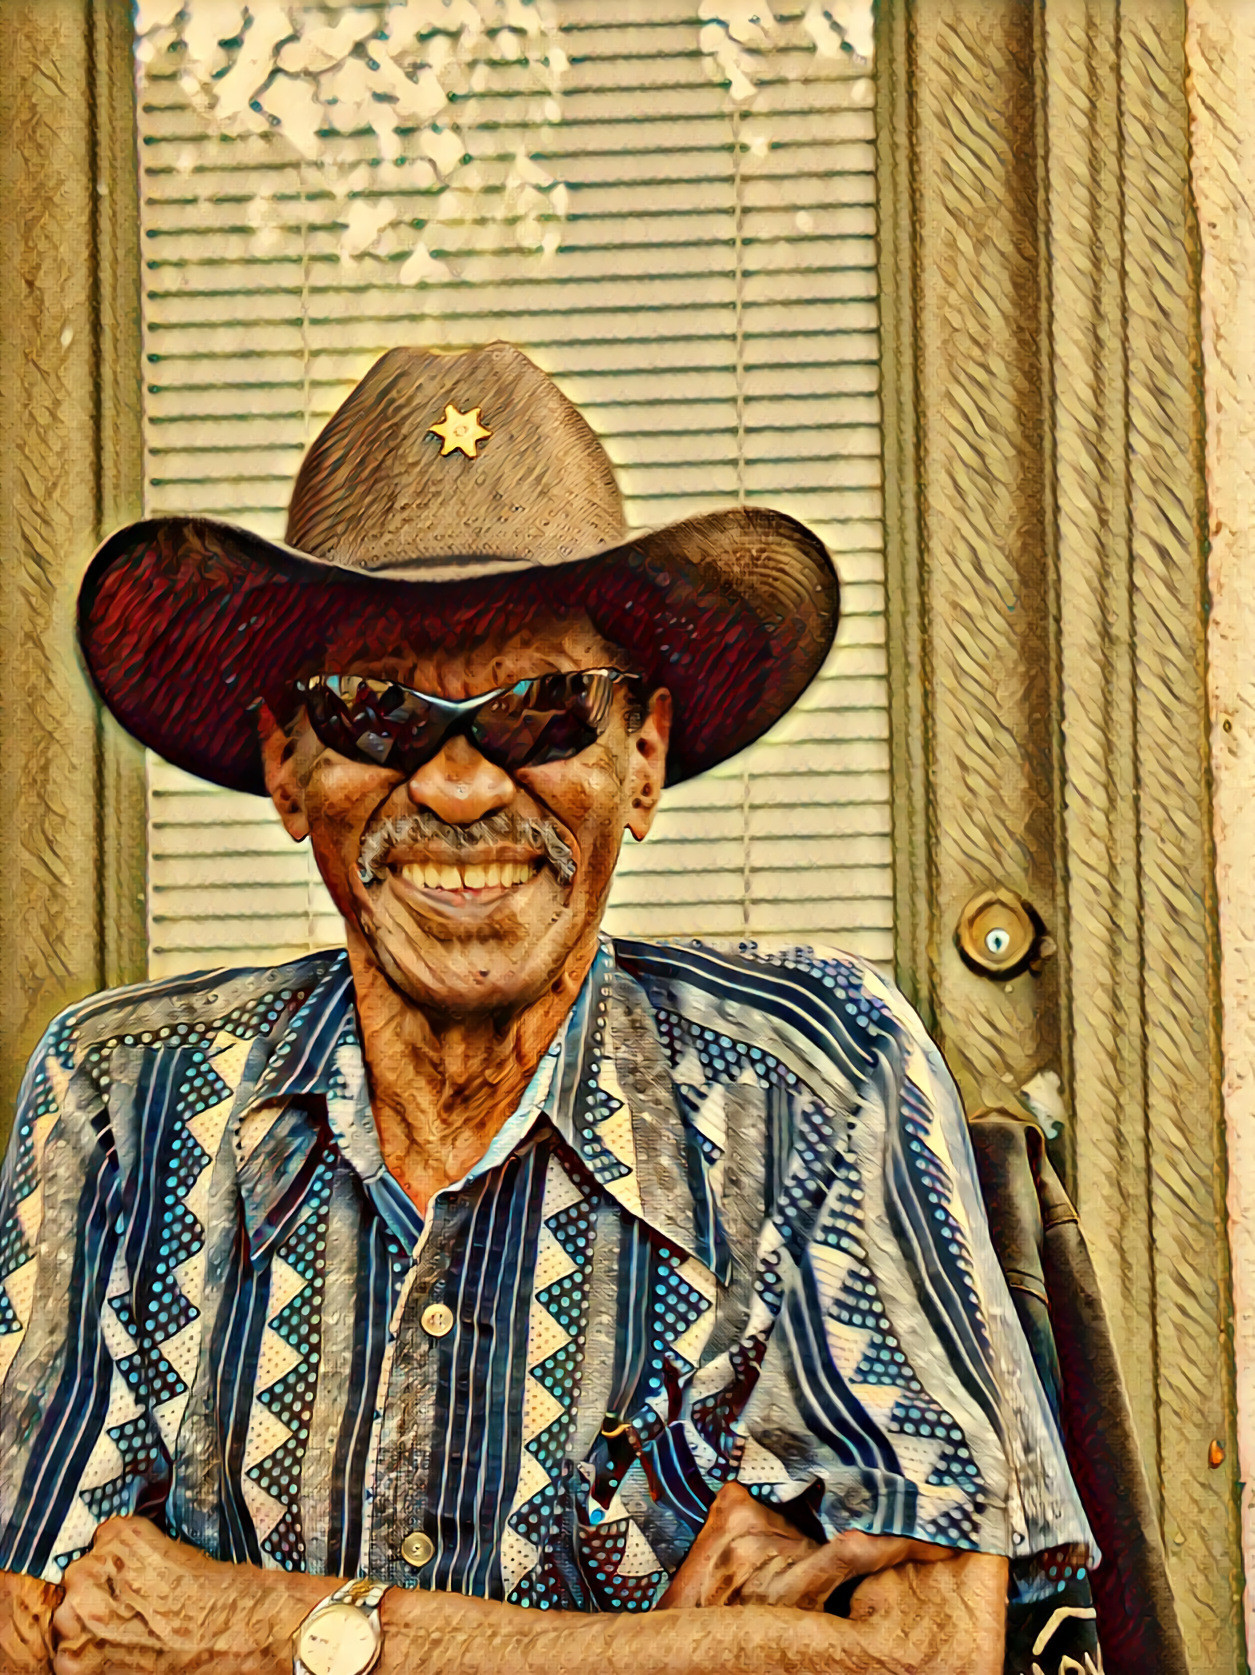 The great Clarence “Gatemouth” Brown 